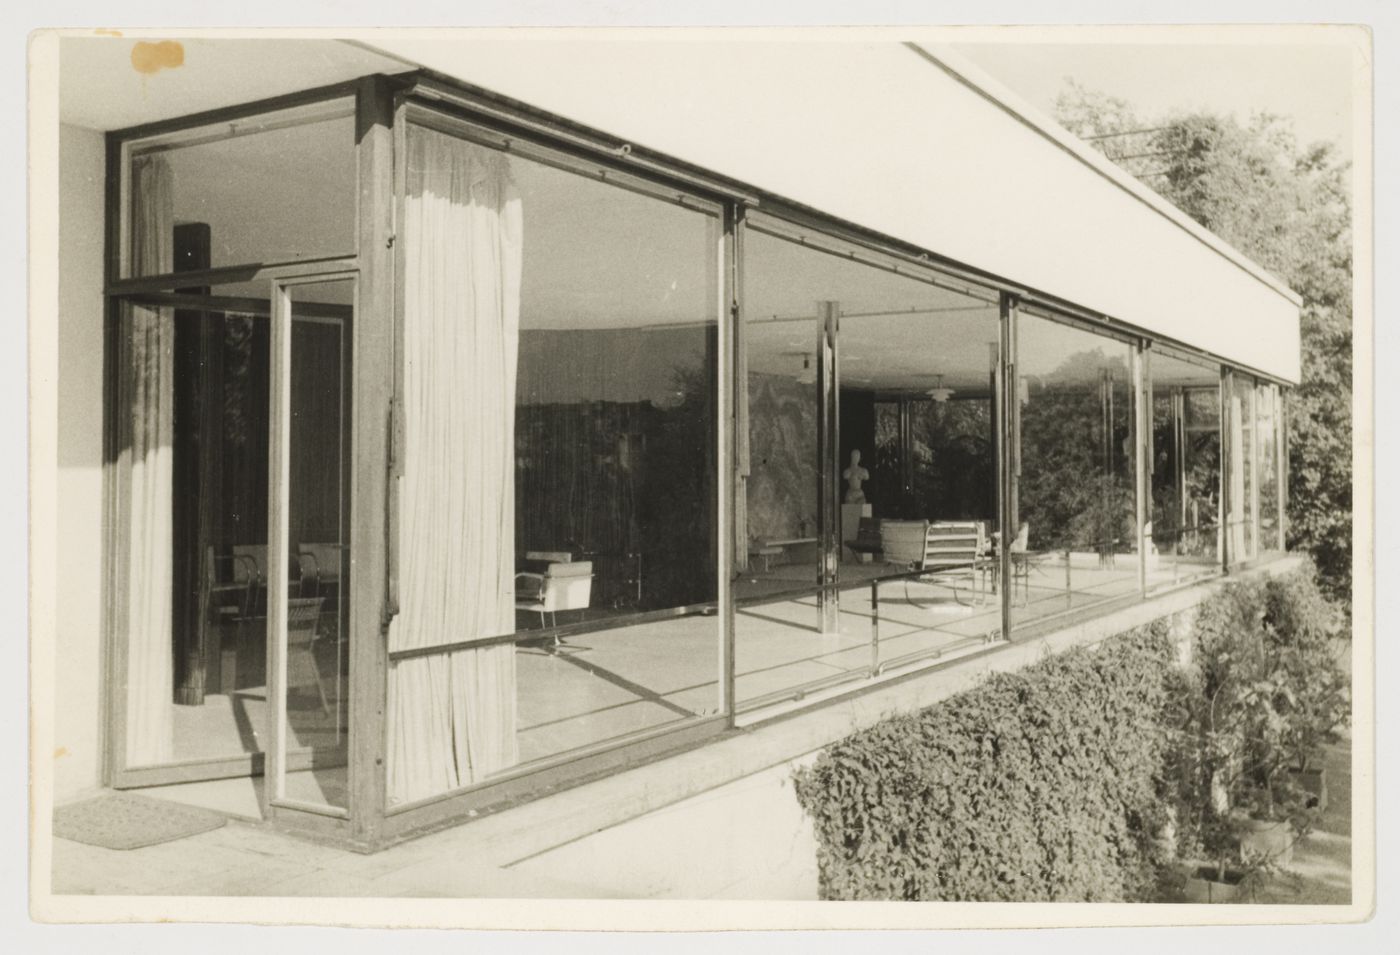 View of the south façade of Tugendhat House showing the glass wall from the terrace, Brno, Czechoslovakia (now Czech Republic)